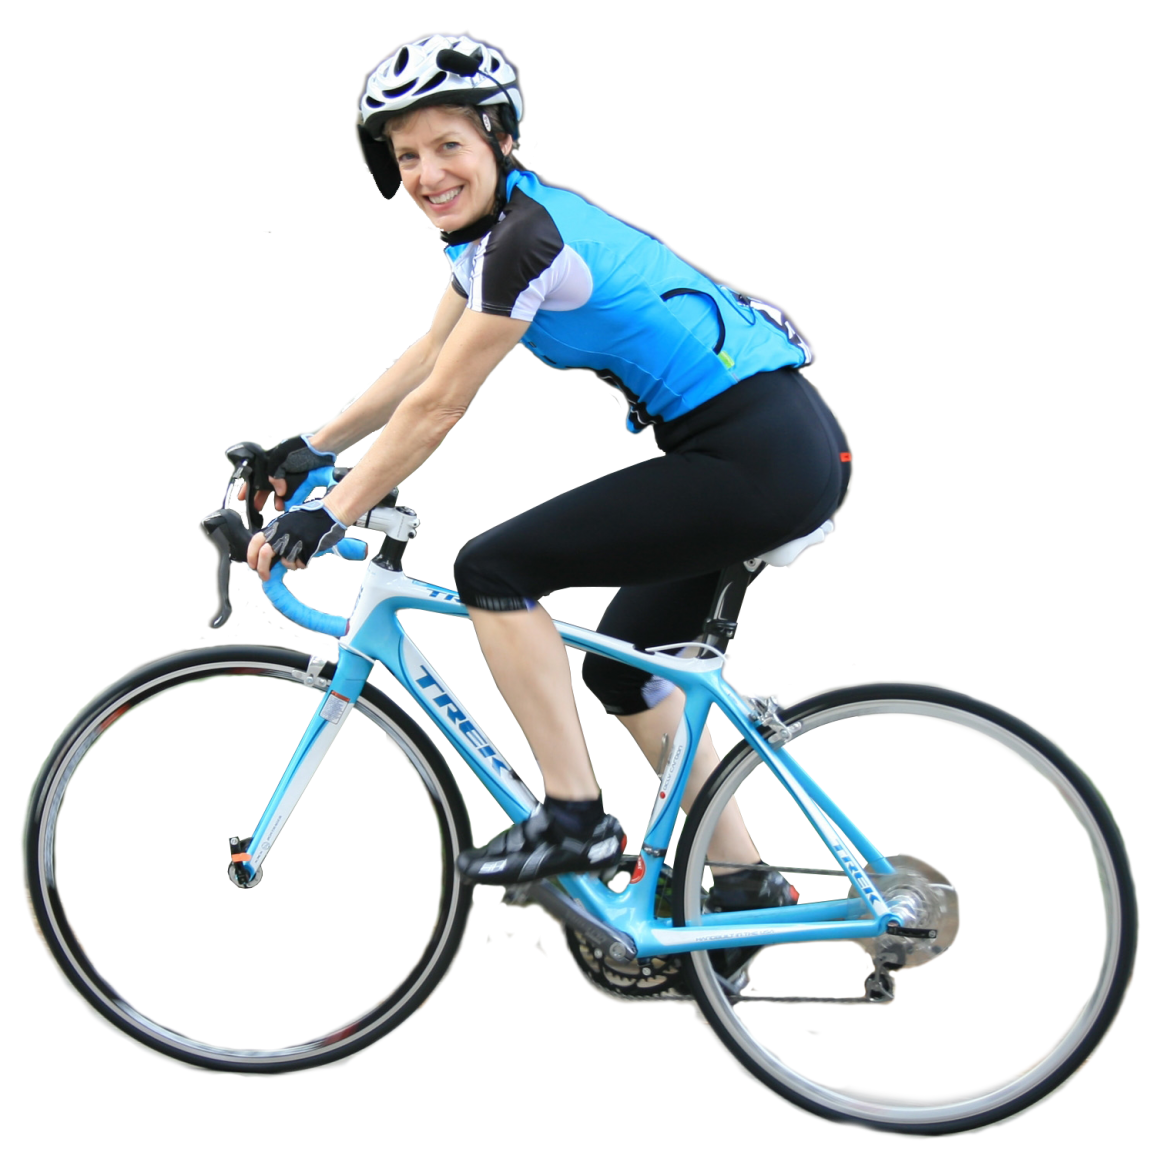 Bike Ride Clipart Png Image - Ride A Bike, Transparent background PNG HD thumbnail